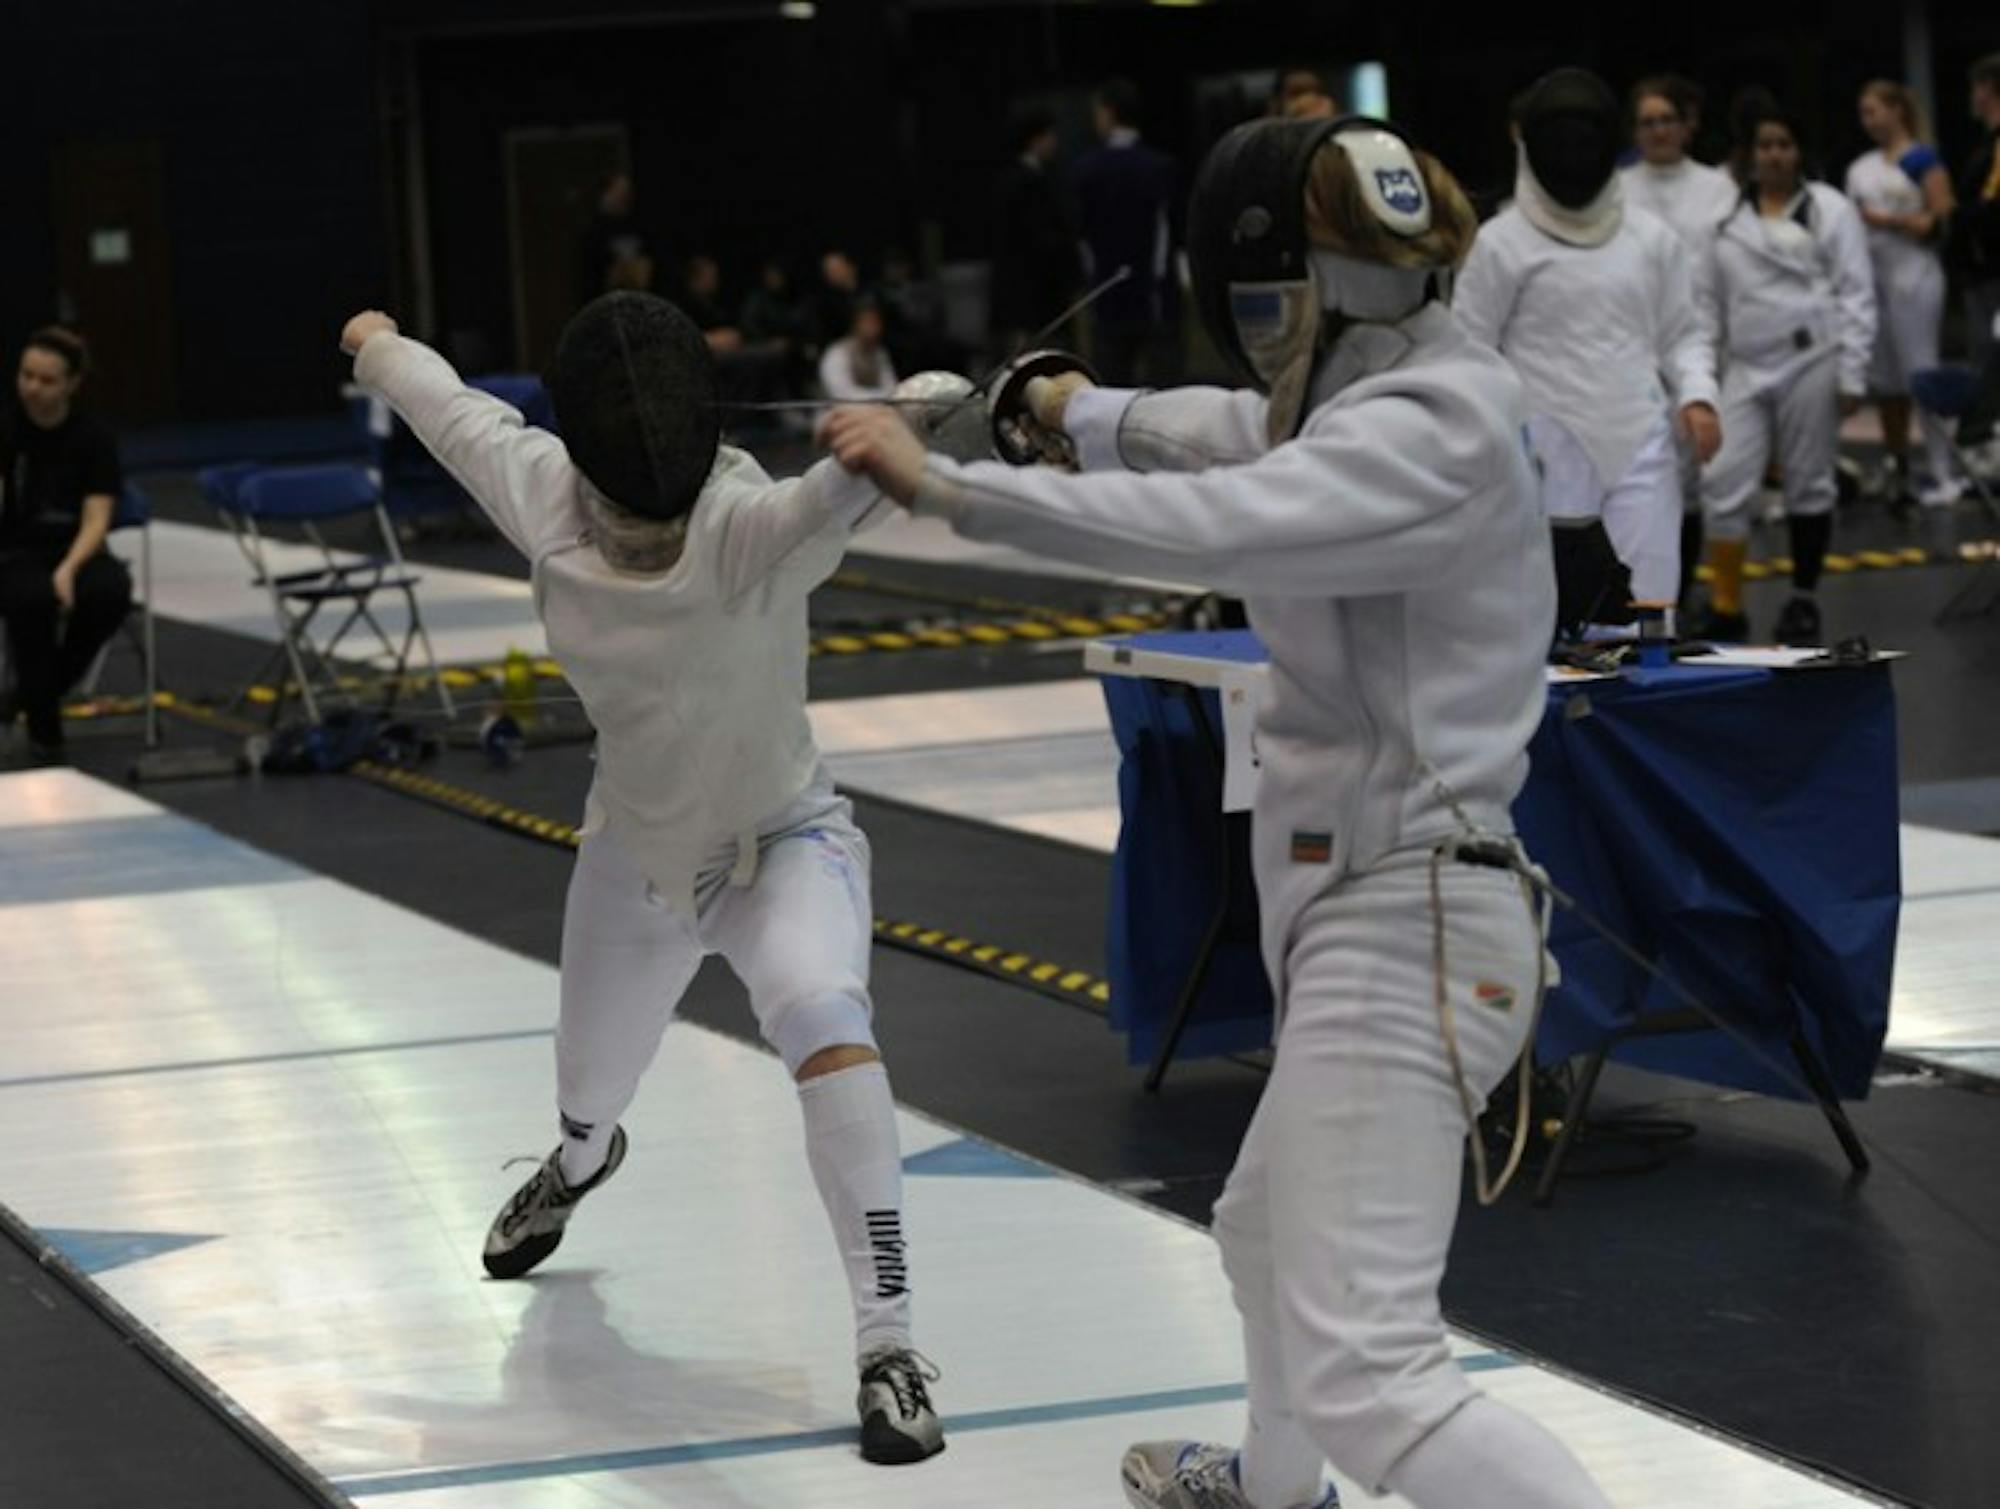 Junior Ashley Severson fences in the women’s epee at the Midwest Conference Championships on Mar. 2 at Notre Dame. Severson tied for third in the same event at the North American Cup on Sunday.